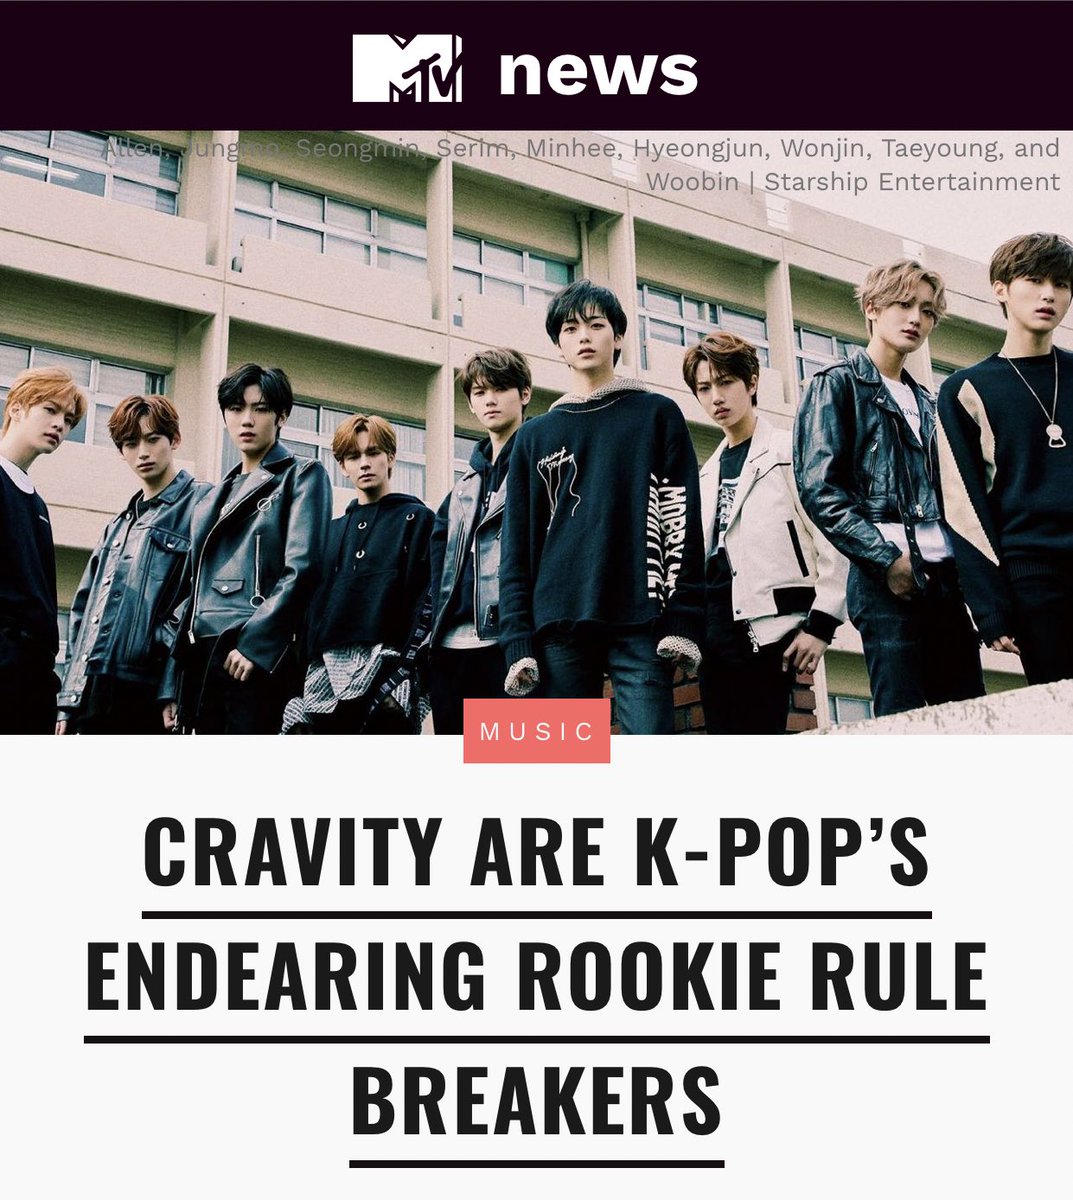 mtv news cravity interview (kim taeyoung answers)  — a thread